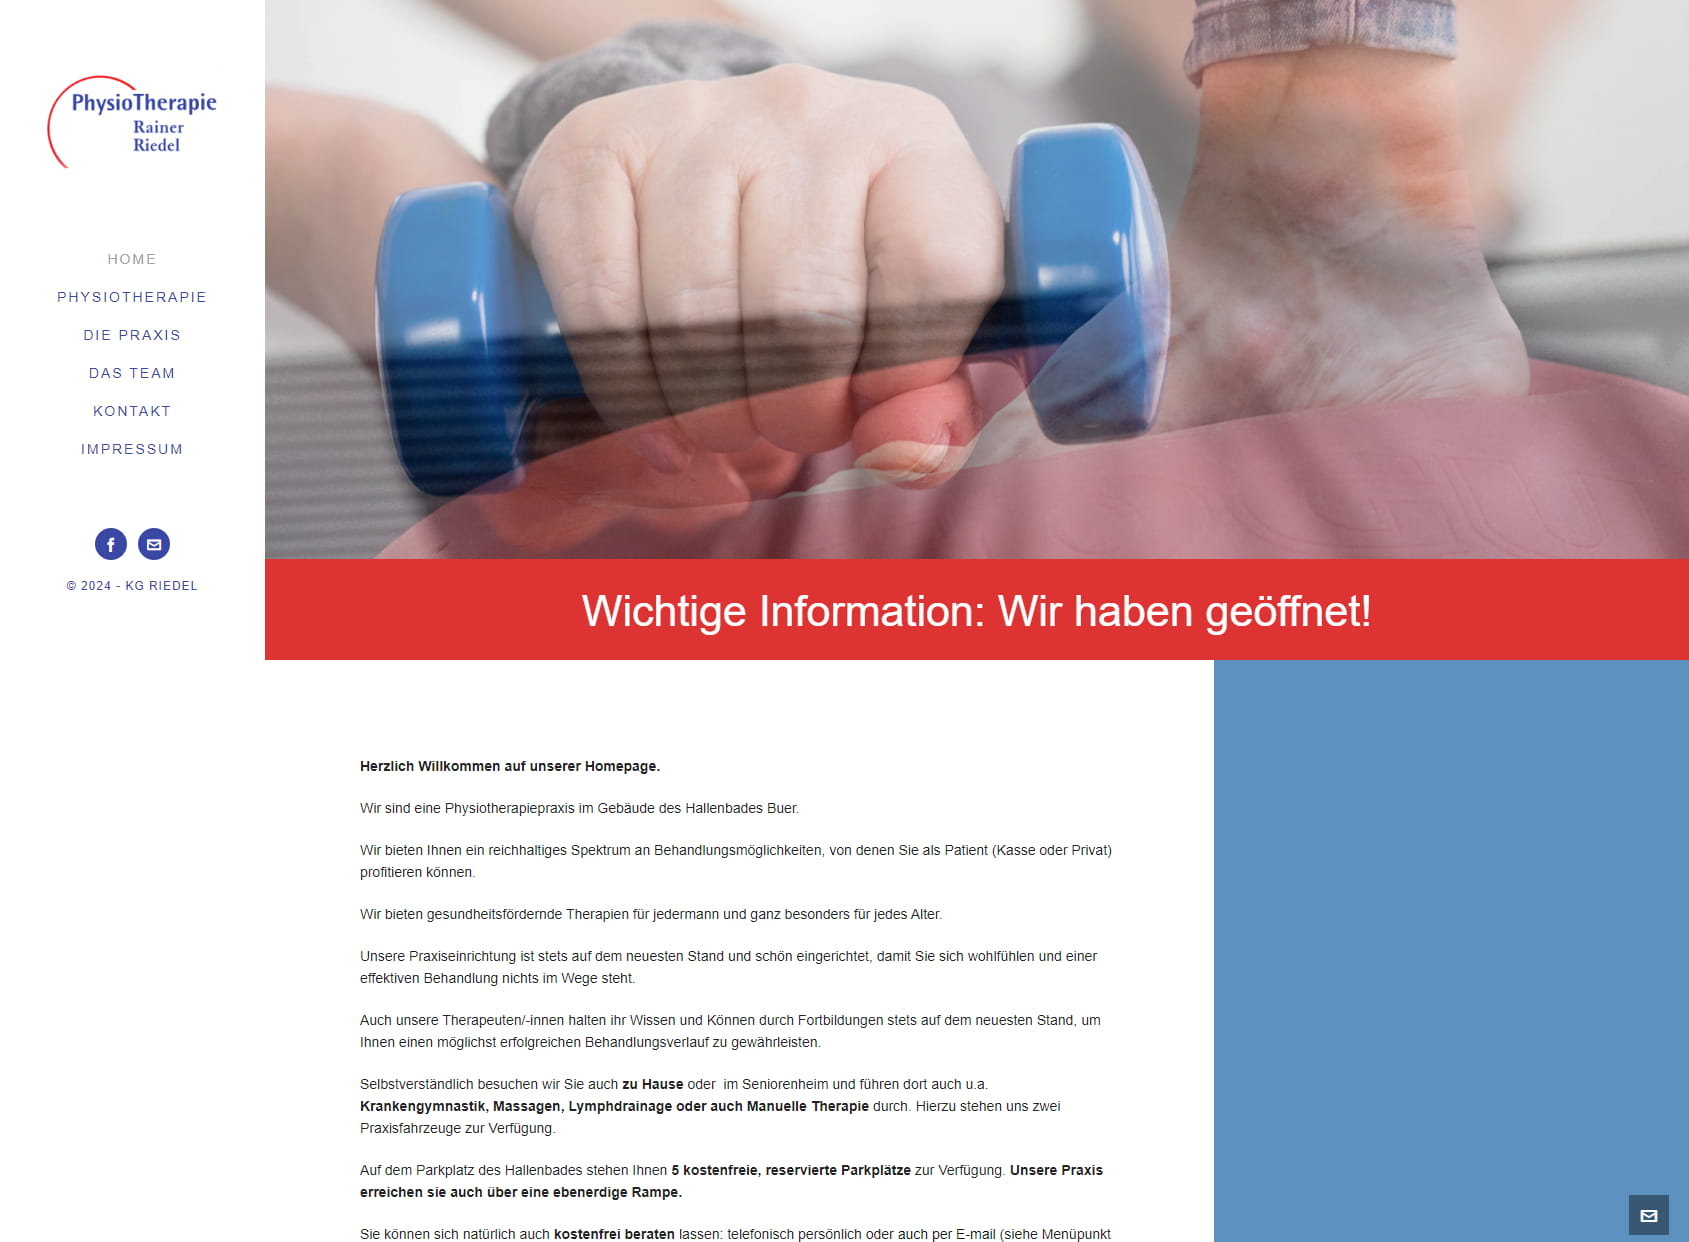 Physiotherapie Riedel